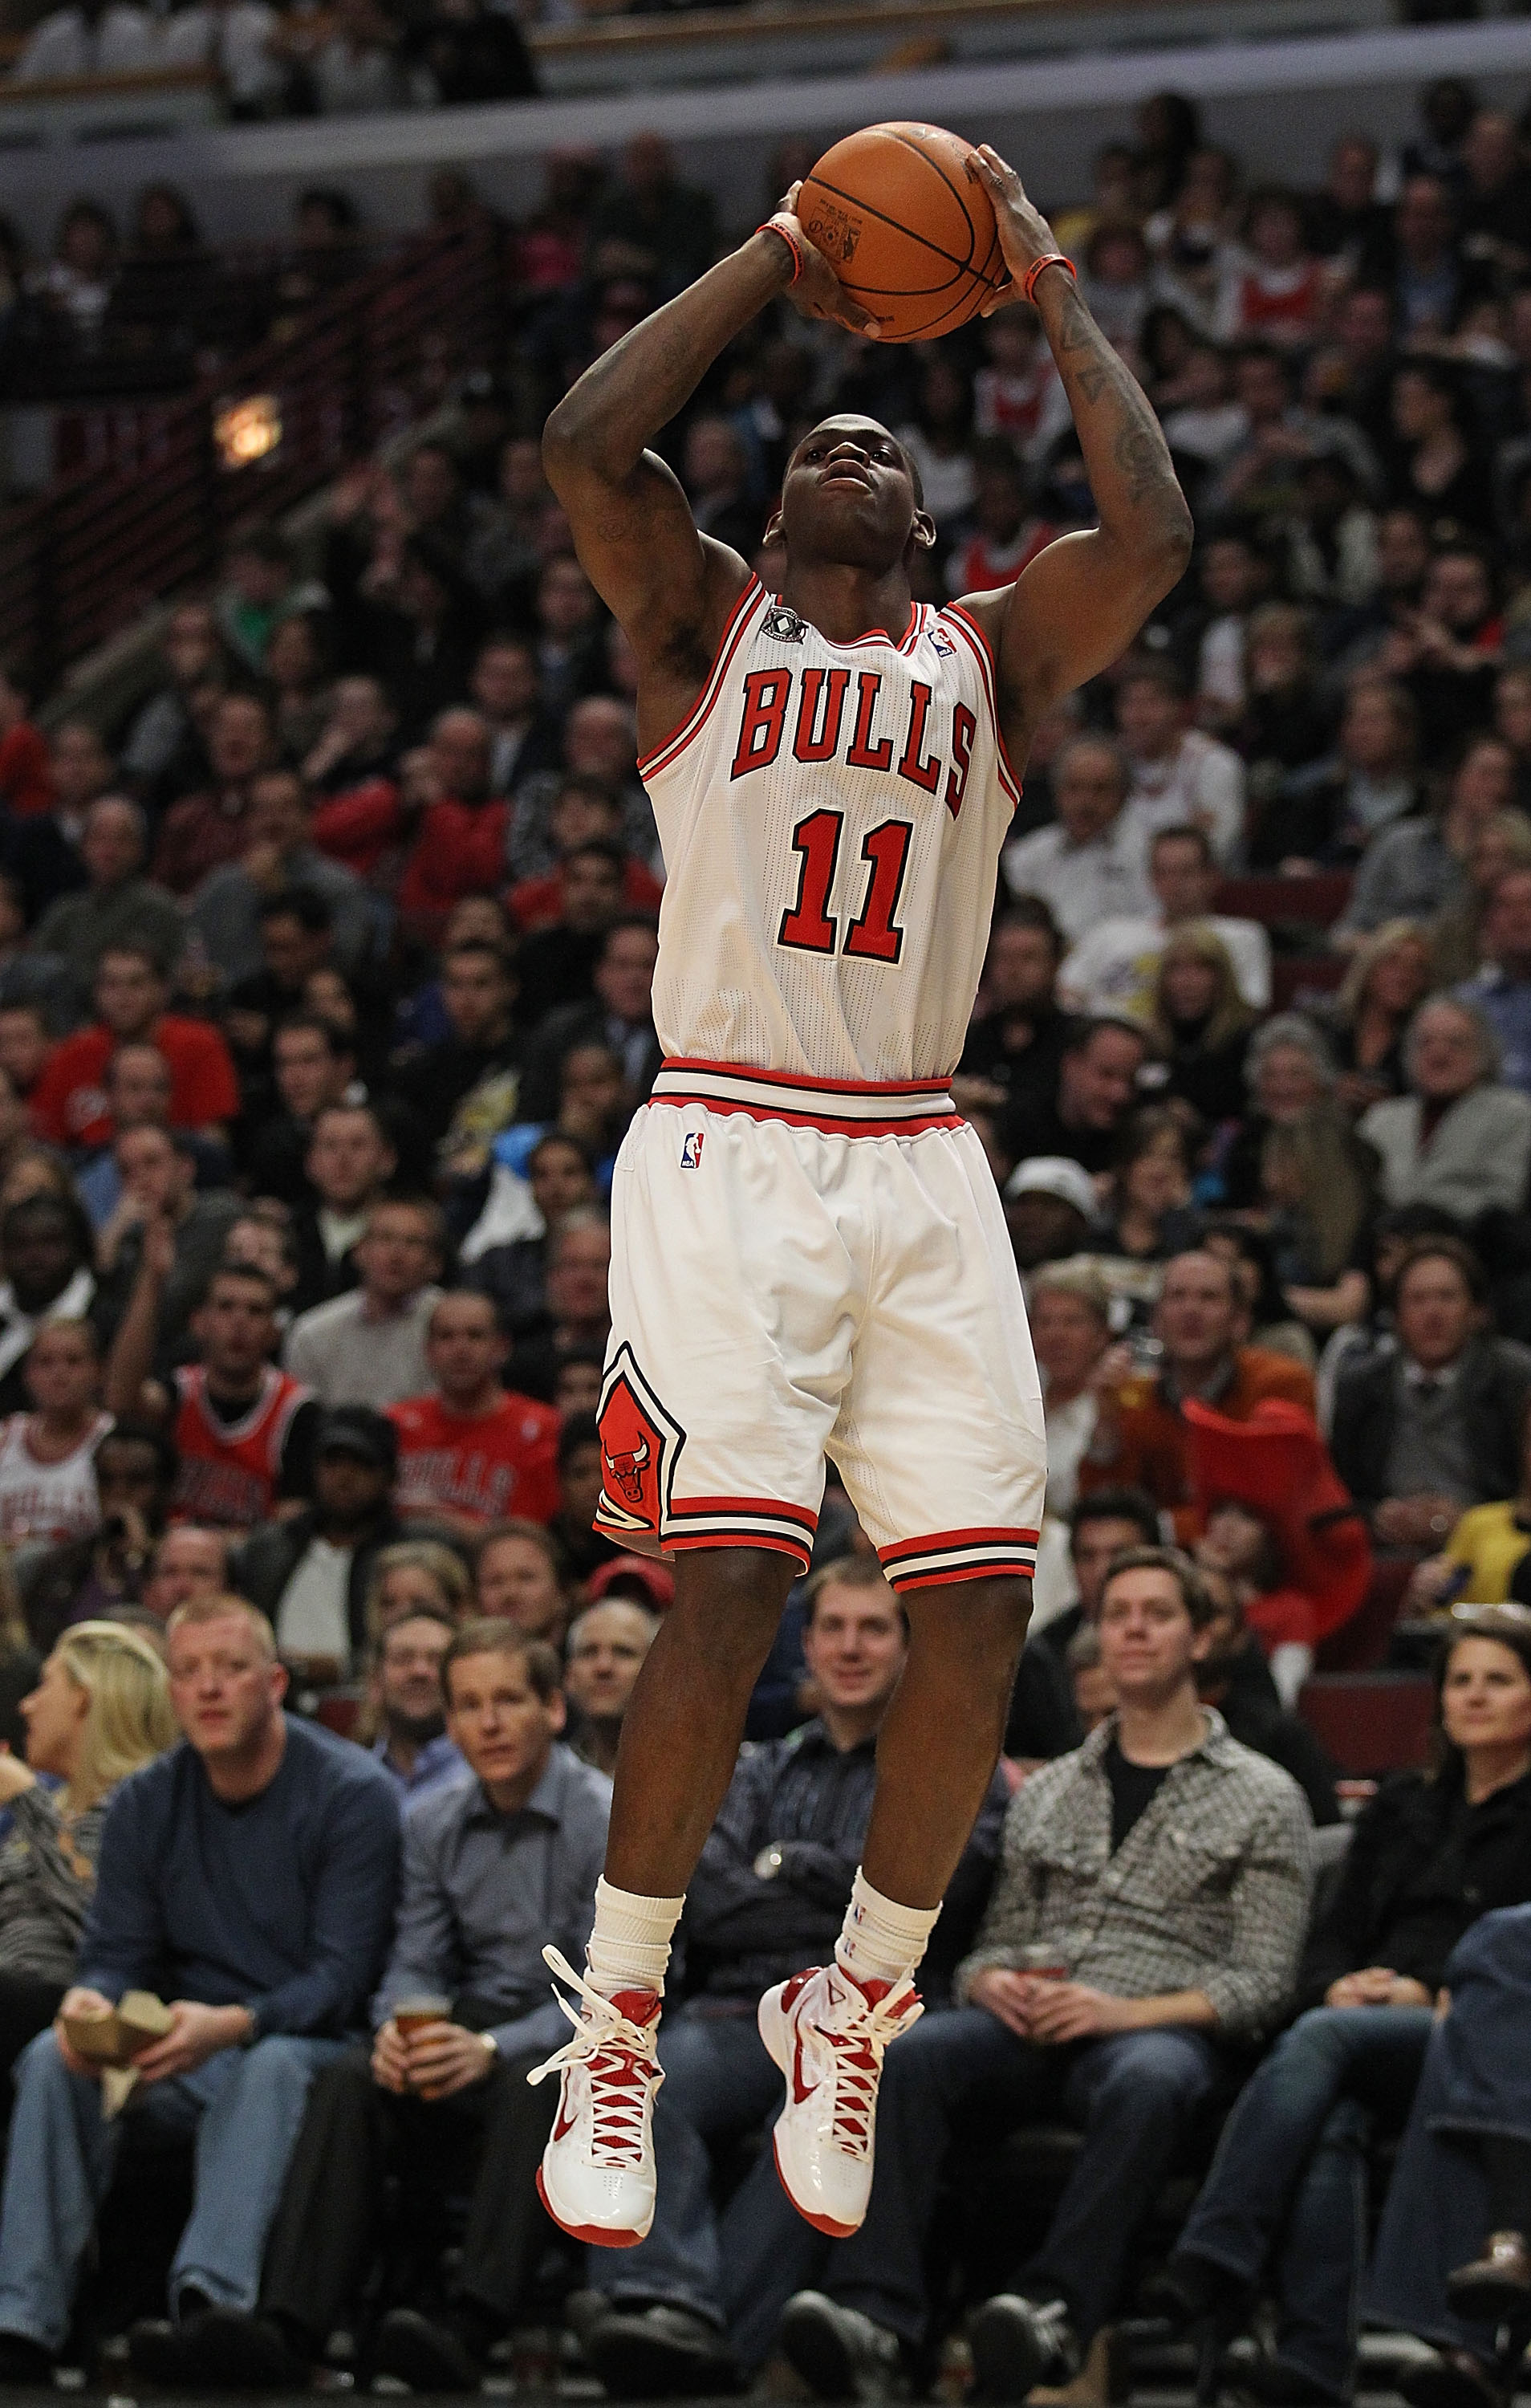 CHICAGO, IL - DECEMBER 10: Ronnie Brewer #11 of the Chicago Bulls puts up a shot against the Los Angeles Lakers at the United Center on December 10, 2010 in Chicago, Illinois. The Bulls defeated the Lakers 88-84. NOTE TO USER: User expressly acknowledges